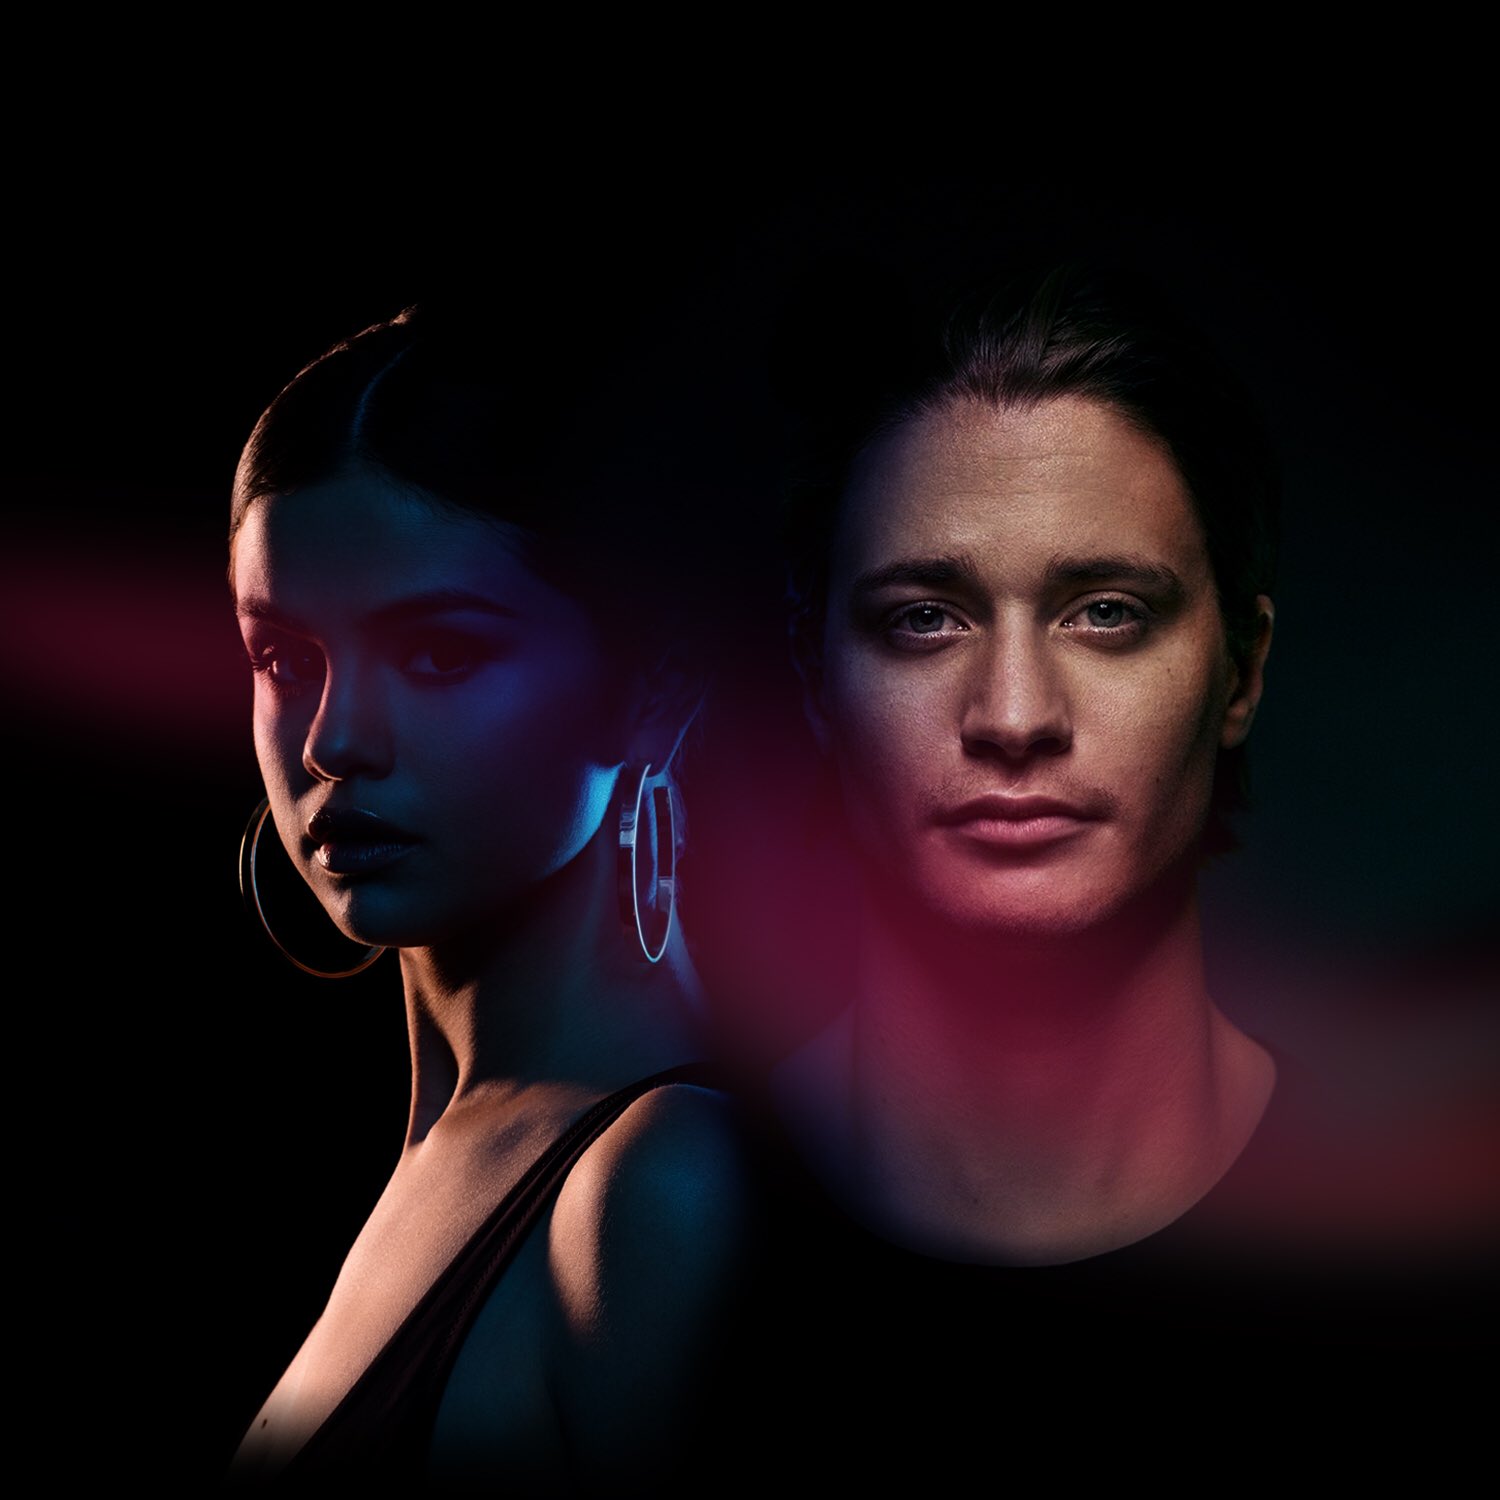 [TROPICAL HOUSE] Kygo & Selena Gomez Collaborate On Instant Hit “It Ain’t Me”